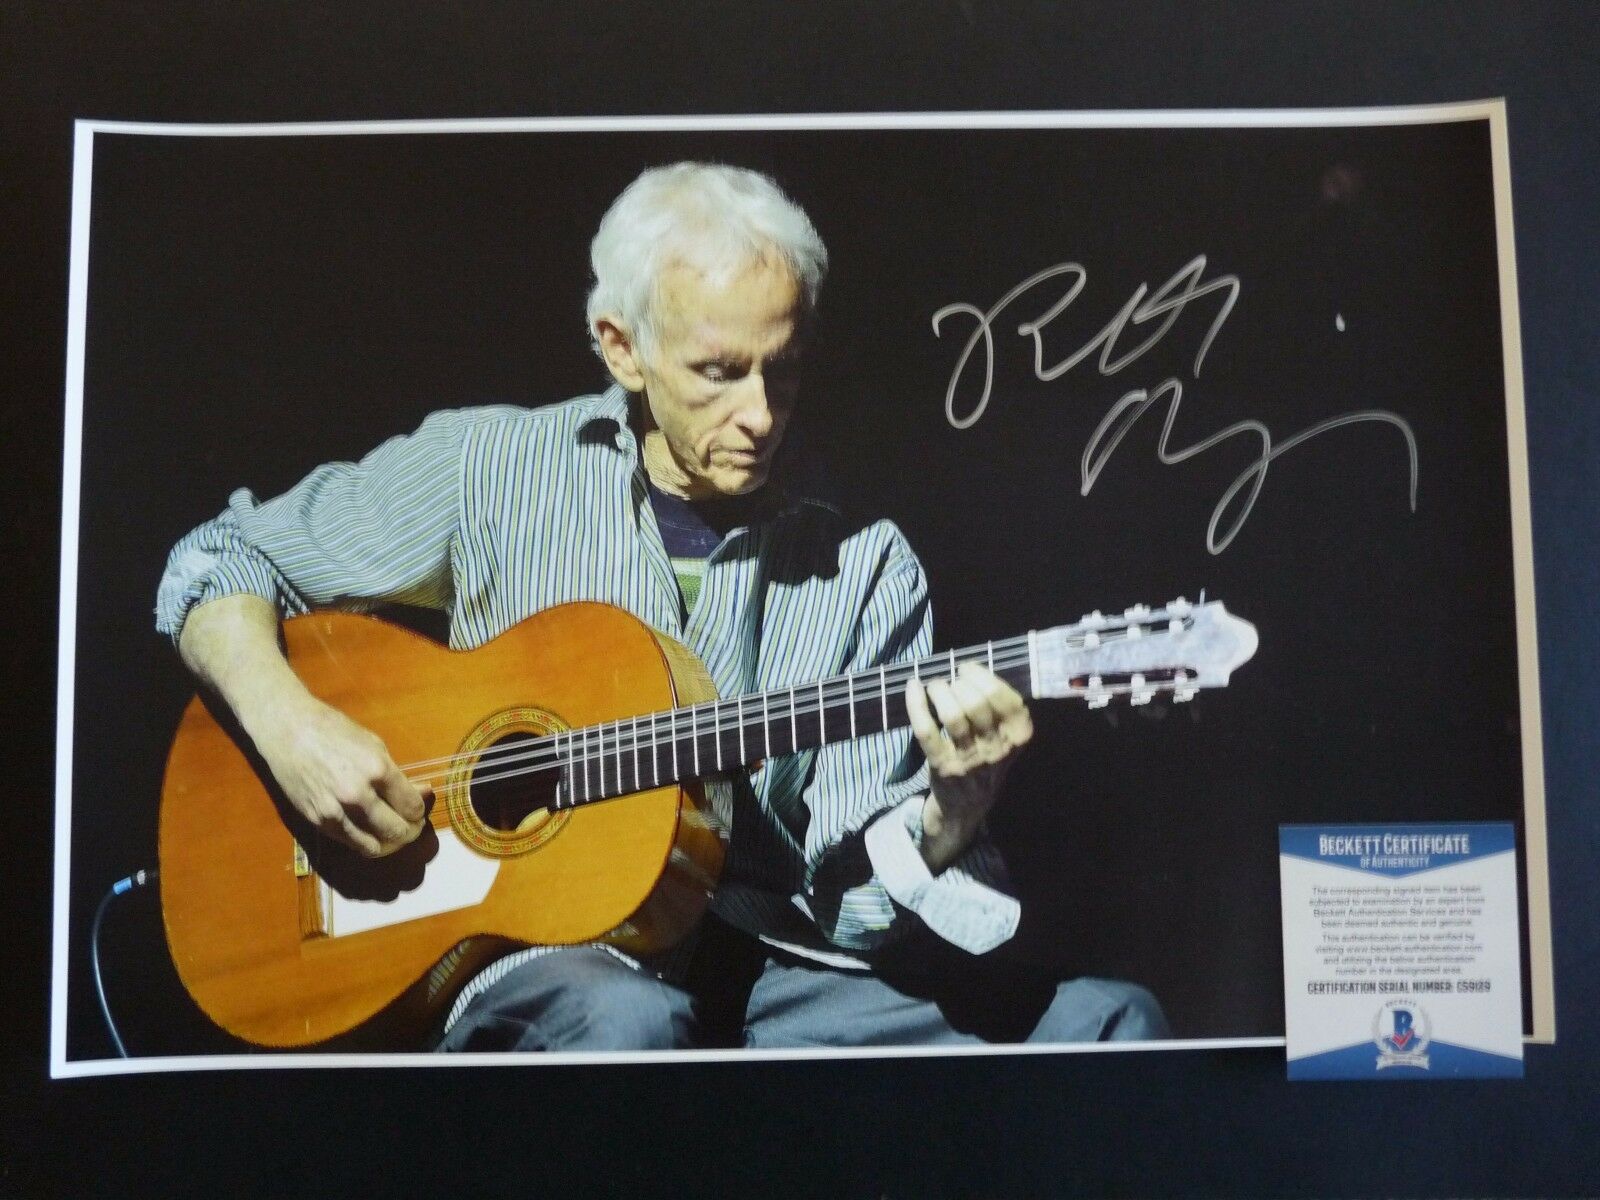 ROBBY KRIEGER THE DOORS SIGNED AUTOGRAPHED 11×17 PHOTO BECKETT CERTIFIED #4 COLLECTIBLE MEMORABILIA